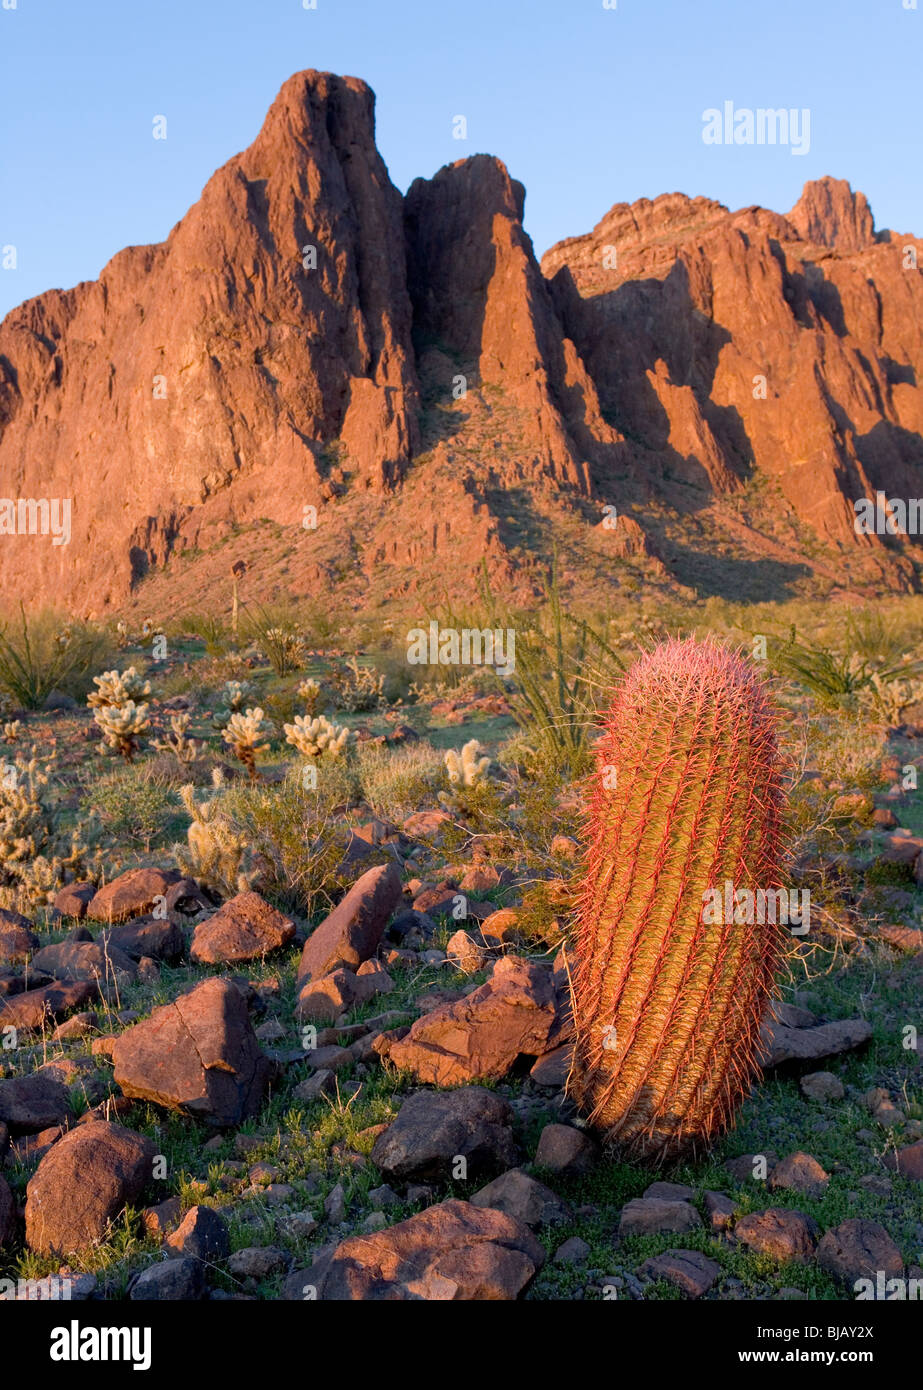 One of the mountain peaks in the Kofa Mountain National Wildlife Refuge at sunset. In the foreground is a fire barrel cactus Stock Photo